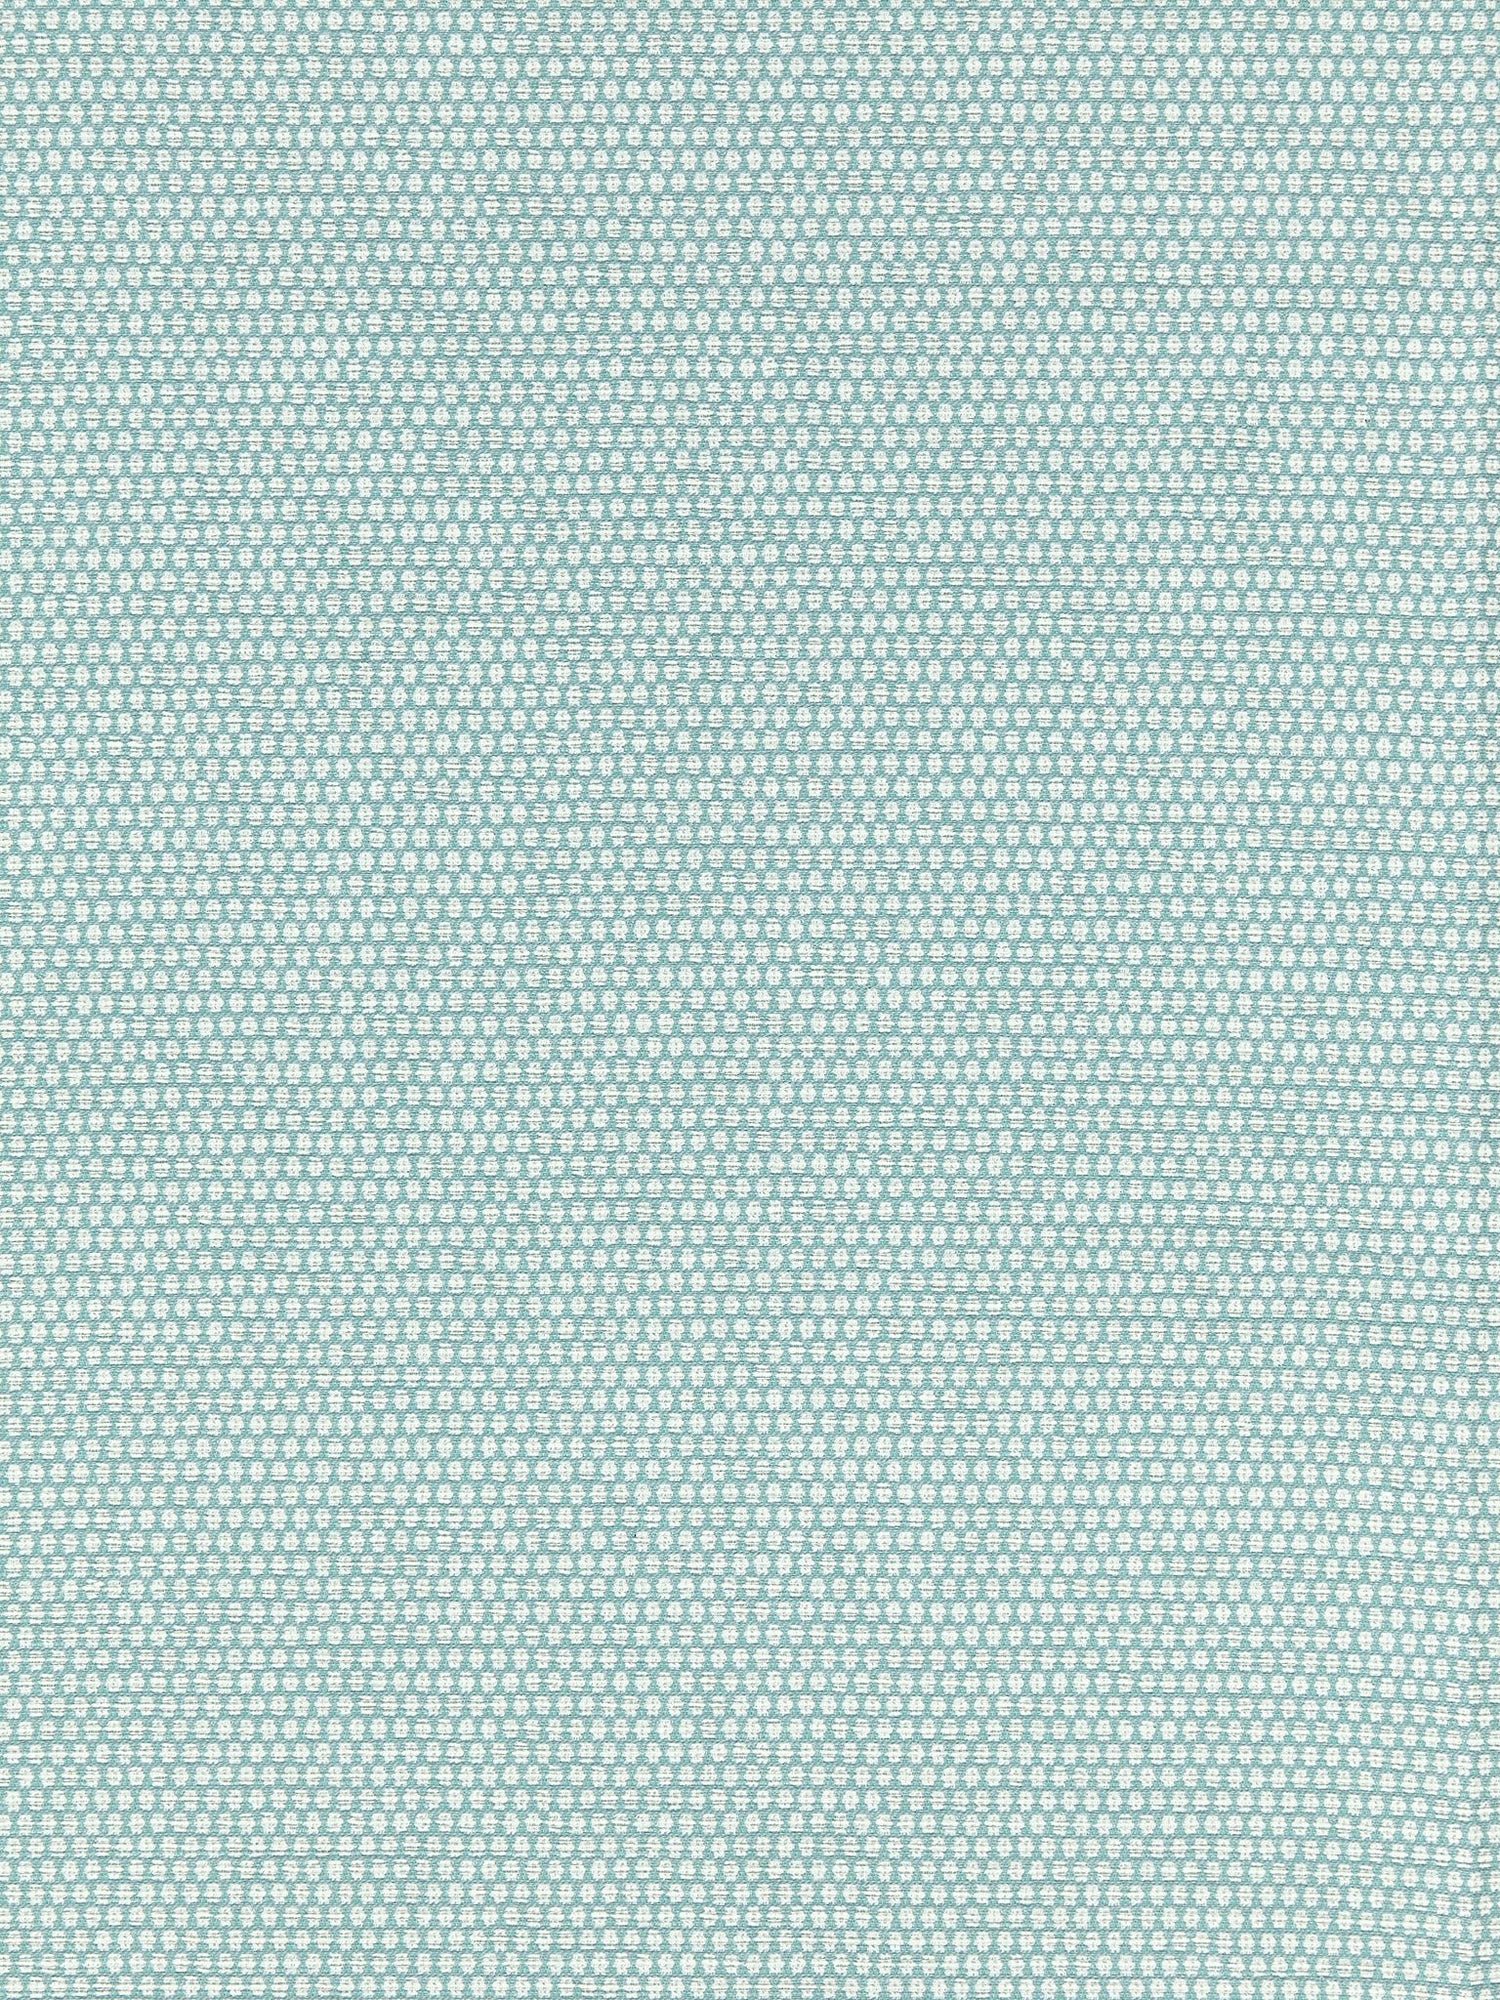 Corsica Weave fabric in surf color - pattern number SC 000227190 - by Scalamandre in the Scalamandre Fabrics Book 1 collection